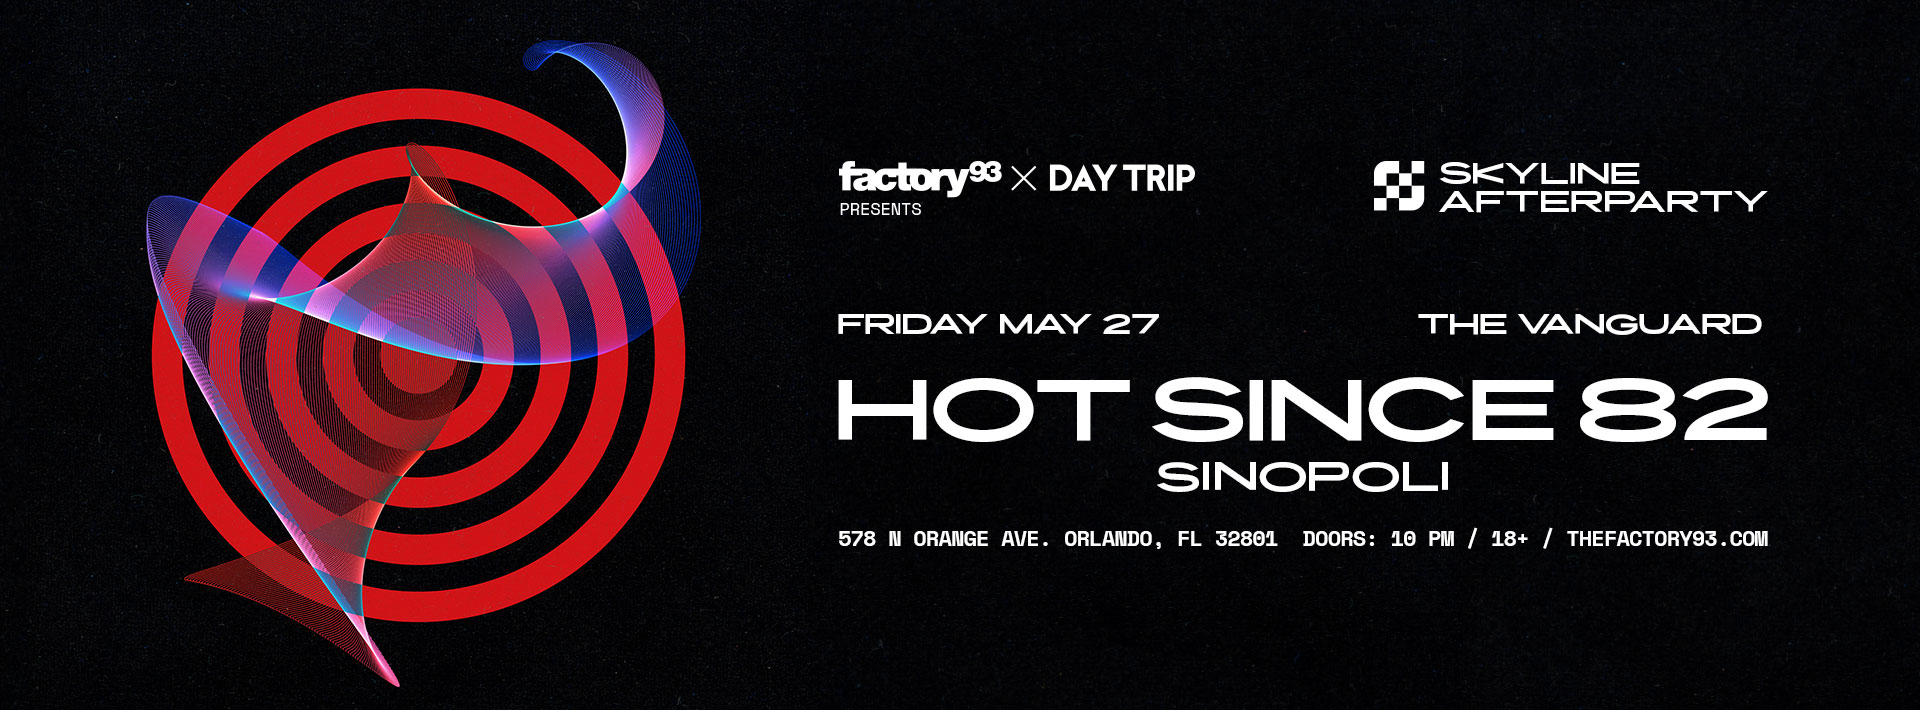 Skyline Afterparty: Hot Since 82